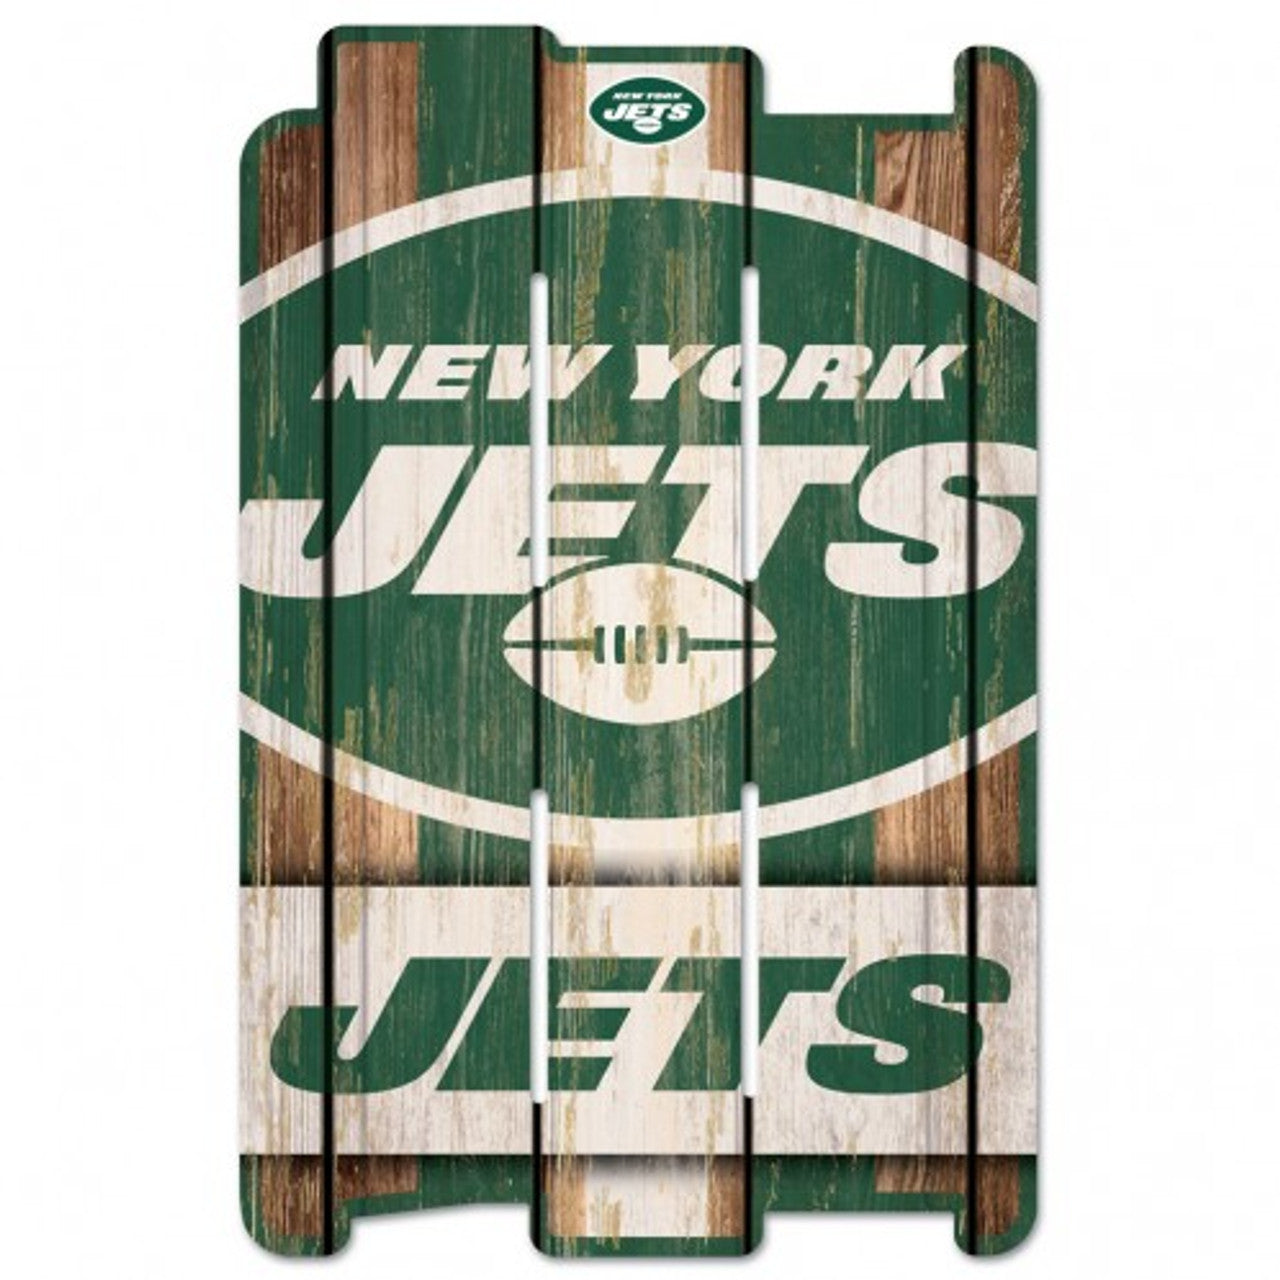 New York Jets 11' x 17' Wood Fence Sign by Wincraft – Eicholtz Sports